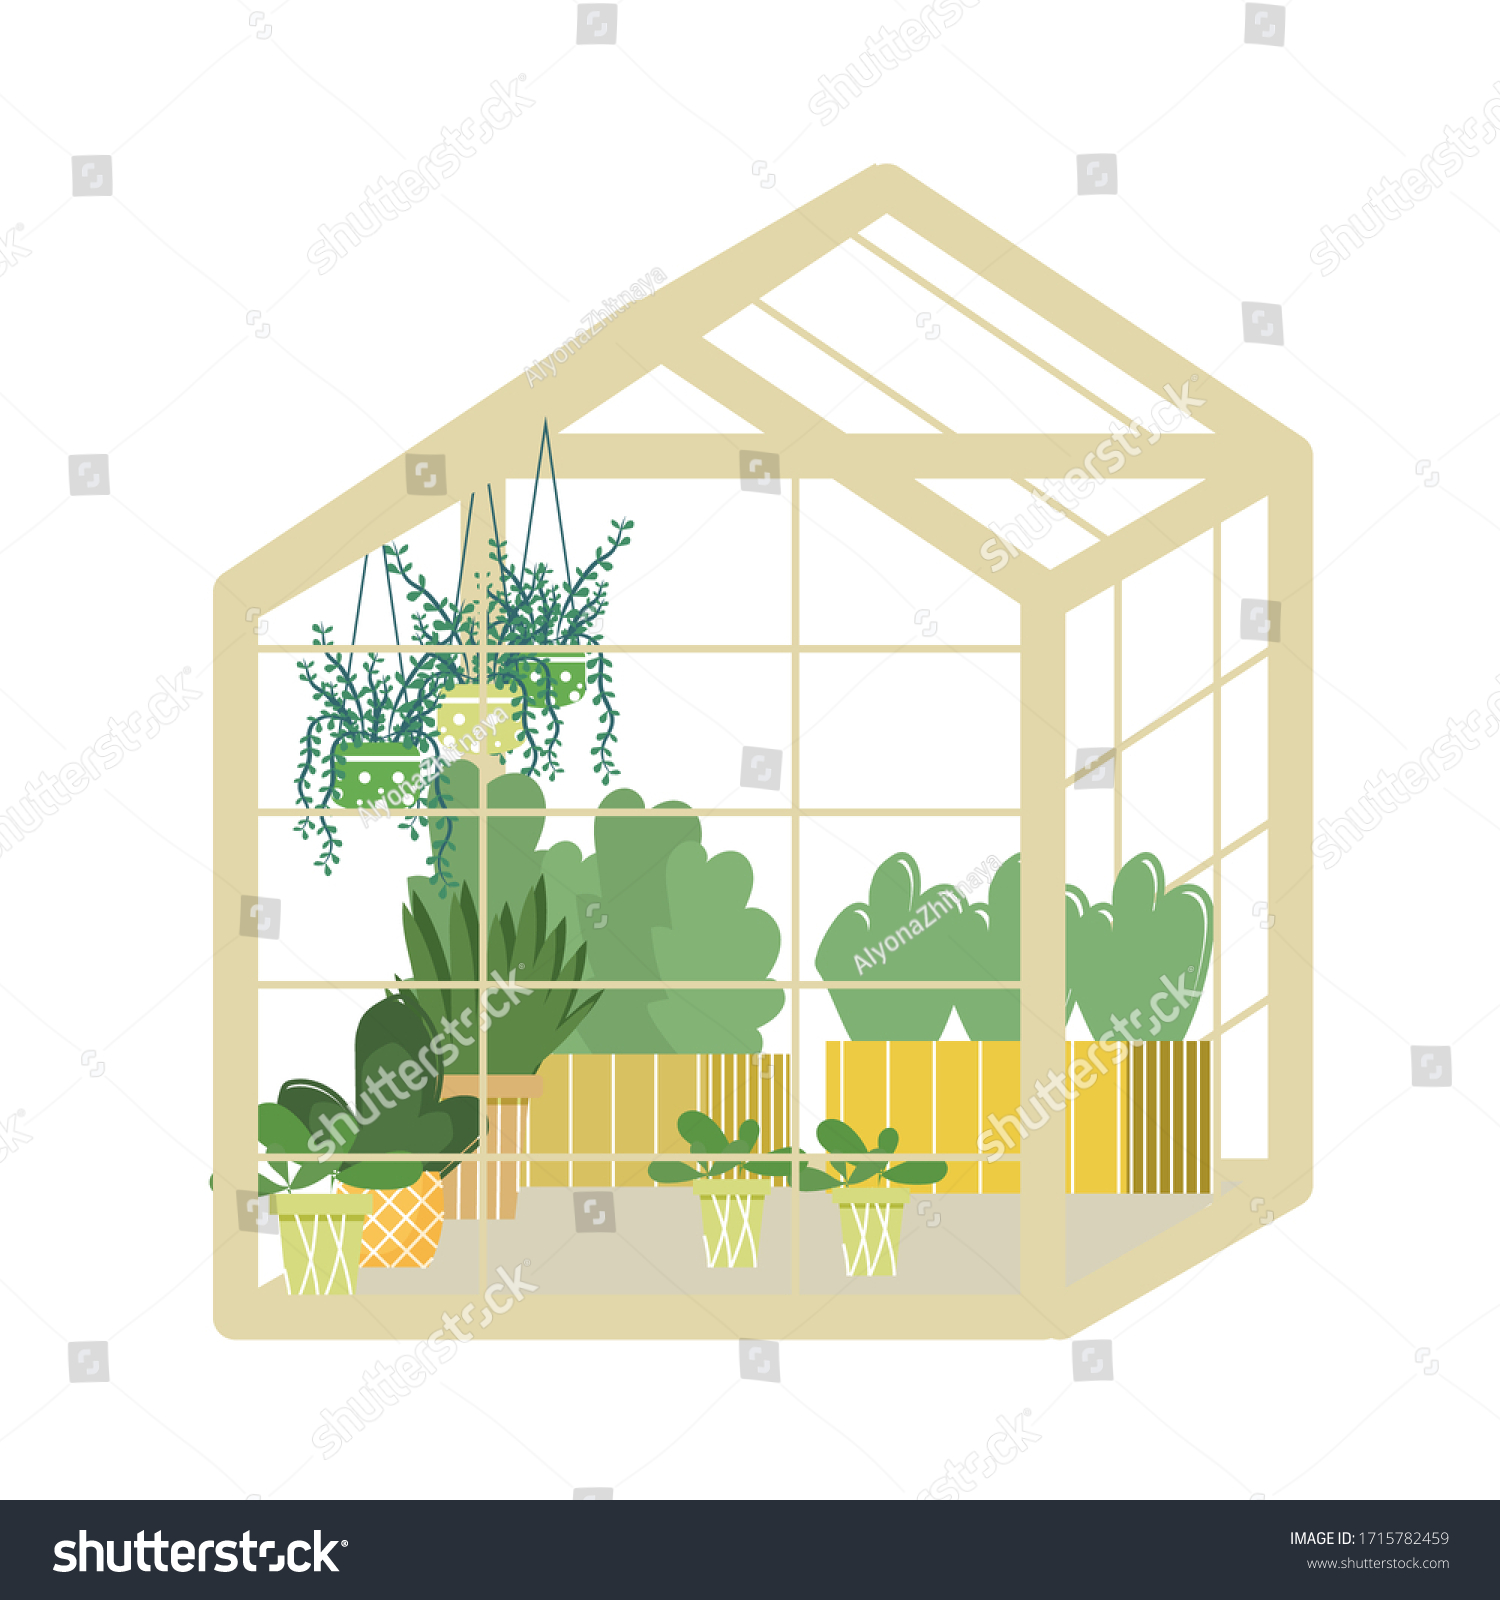 SVG of Stylish greenhouse with plants in pots isolated on white background stock vector illustration. Gardening, agriculture, homegrown concept. In trend modern colors svg